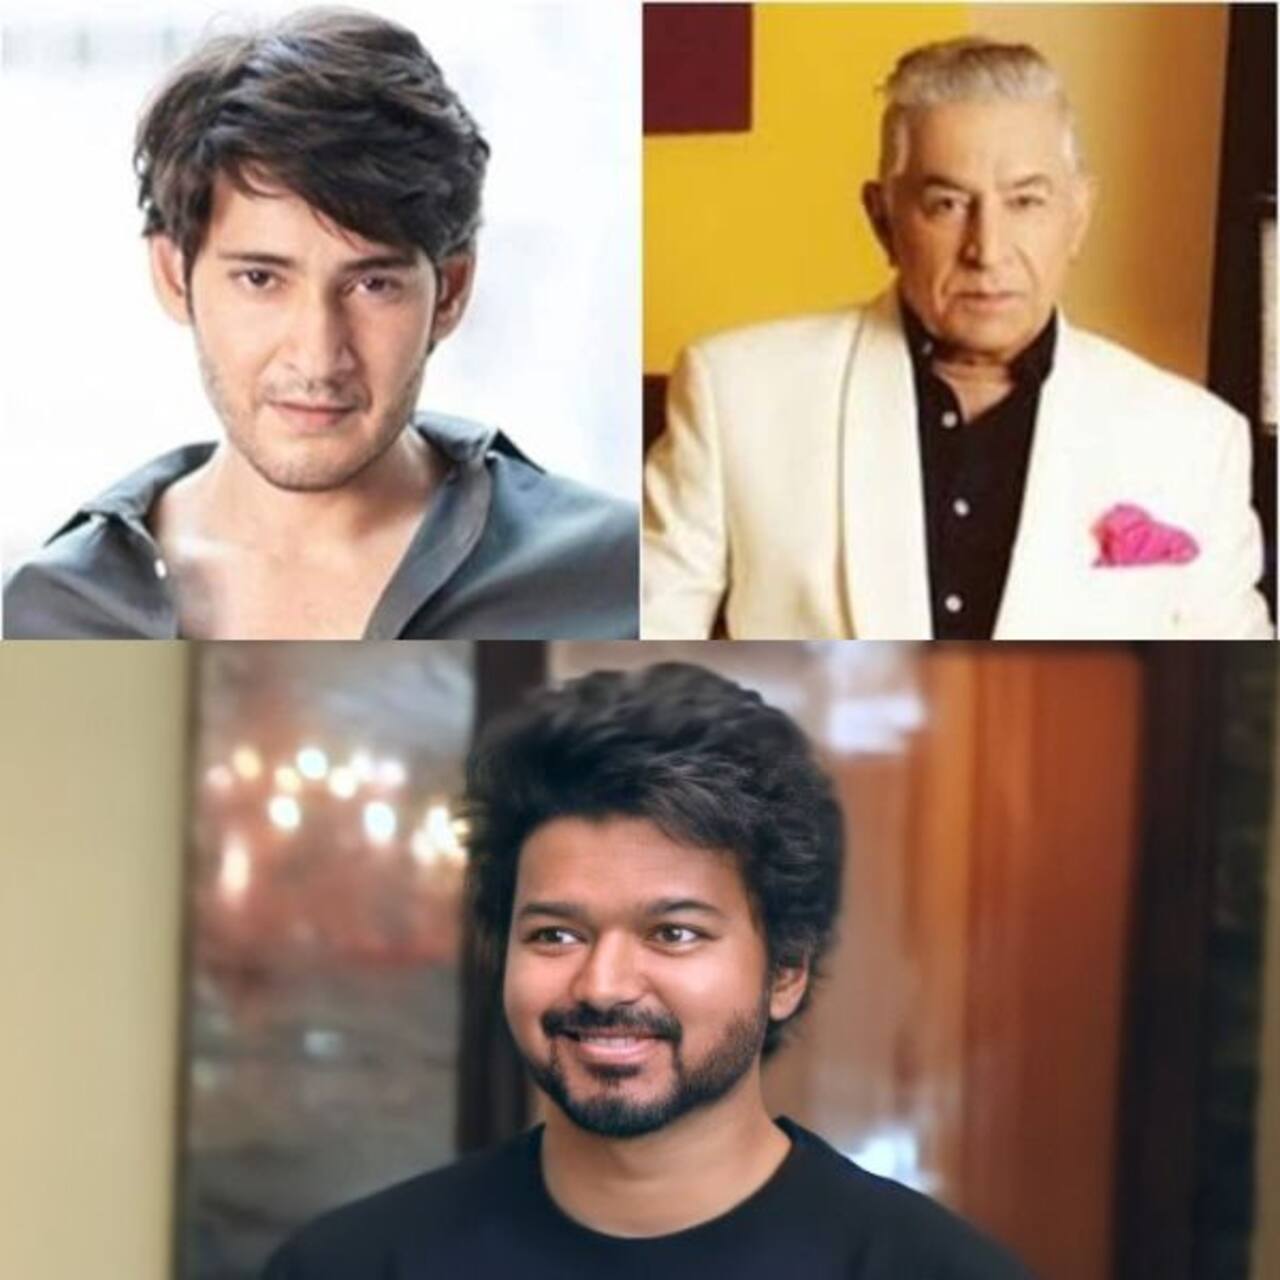 Trending South News Today: Mahesh Babu gets support from Dalip Tahil, Thalapathy Vijay tops list of most popular pan-India male film stars